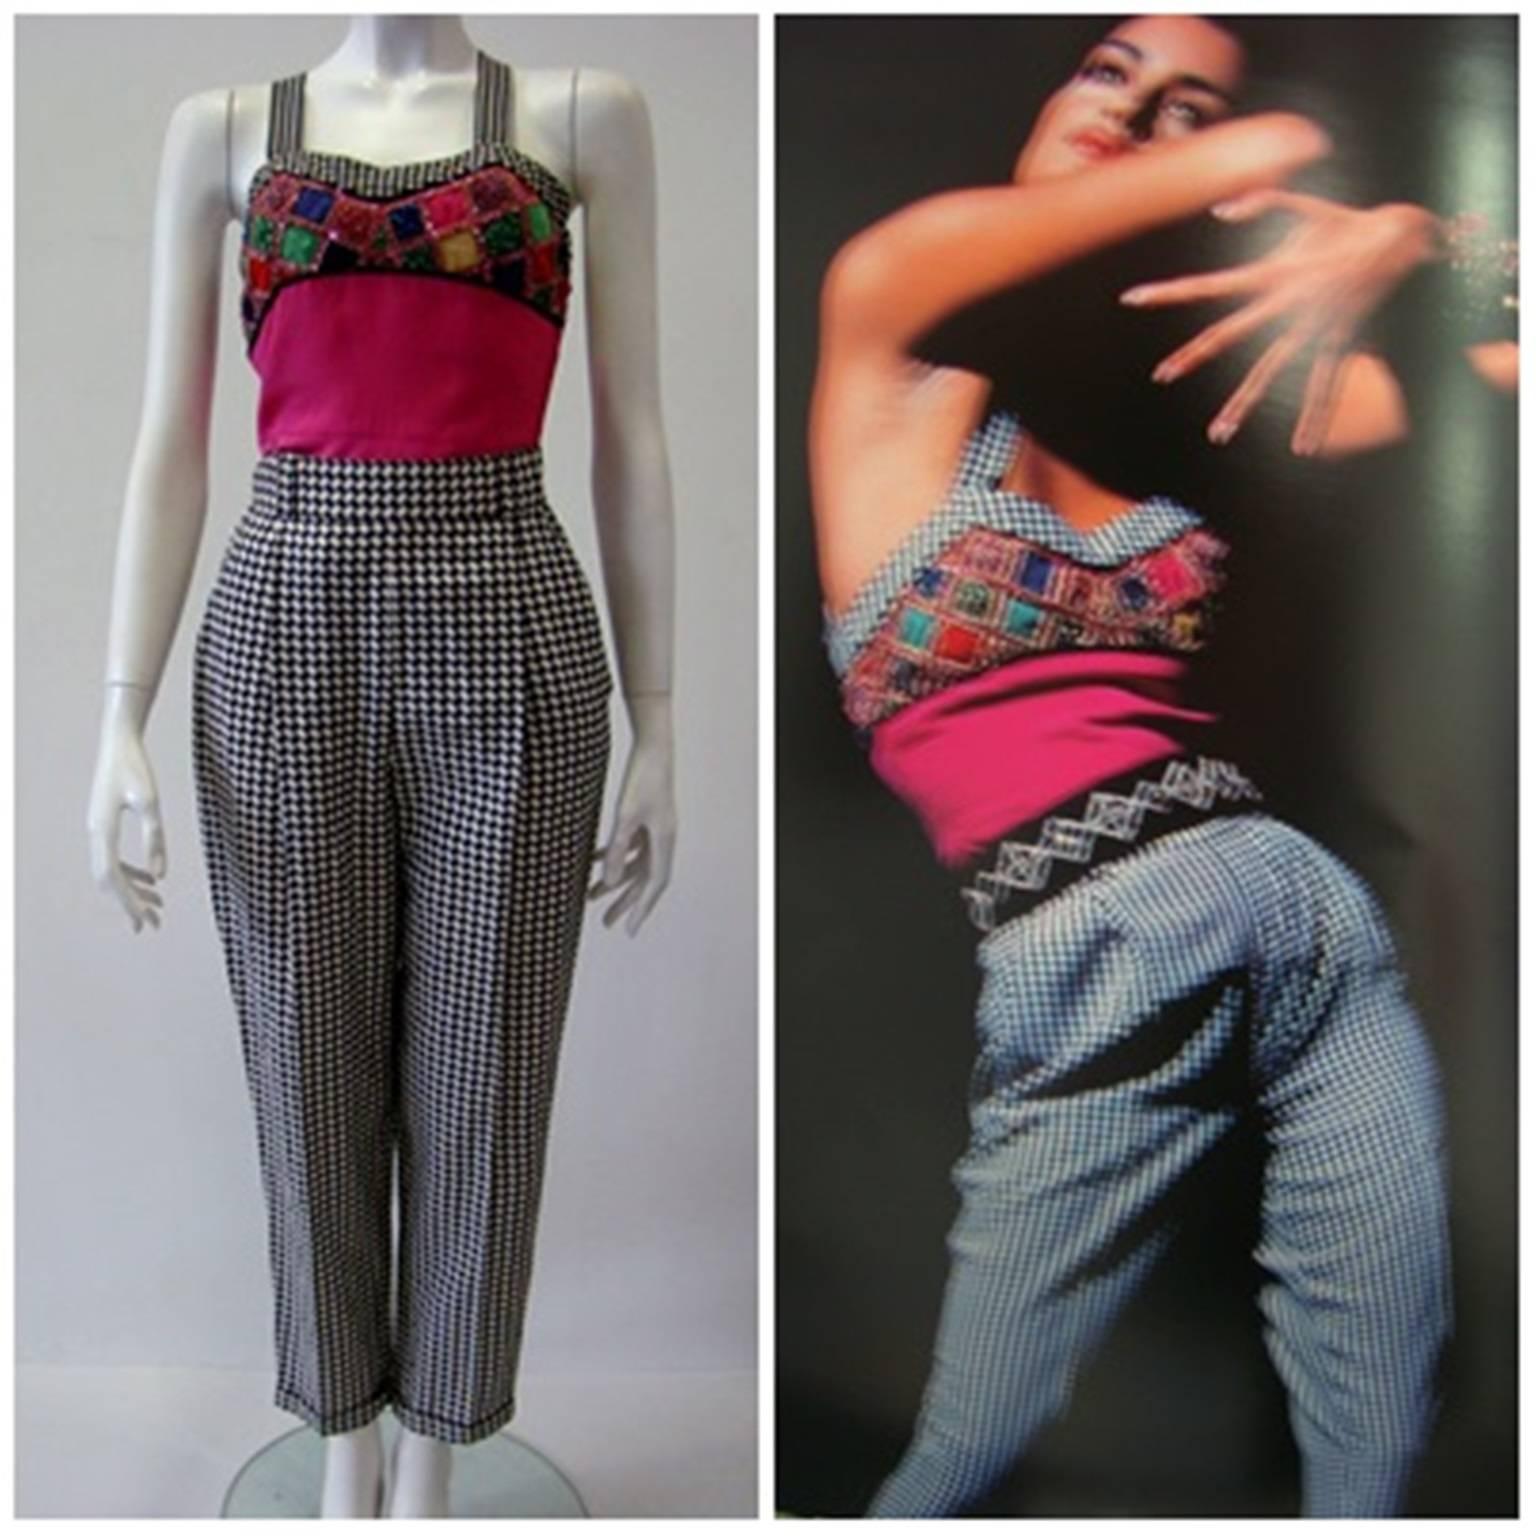 Gianni Versace Black and White Stars Print High Waisted Pants For Sale 1